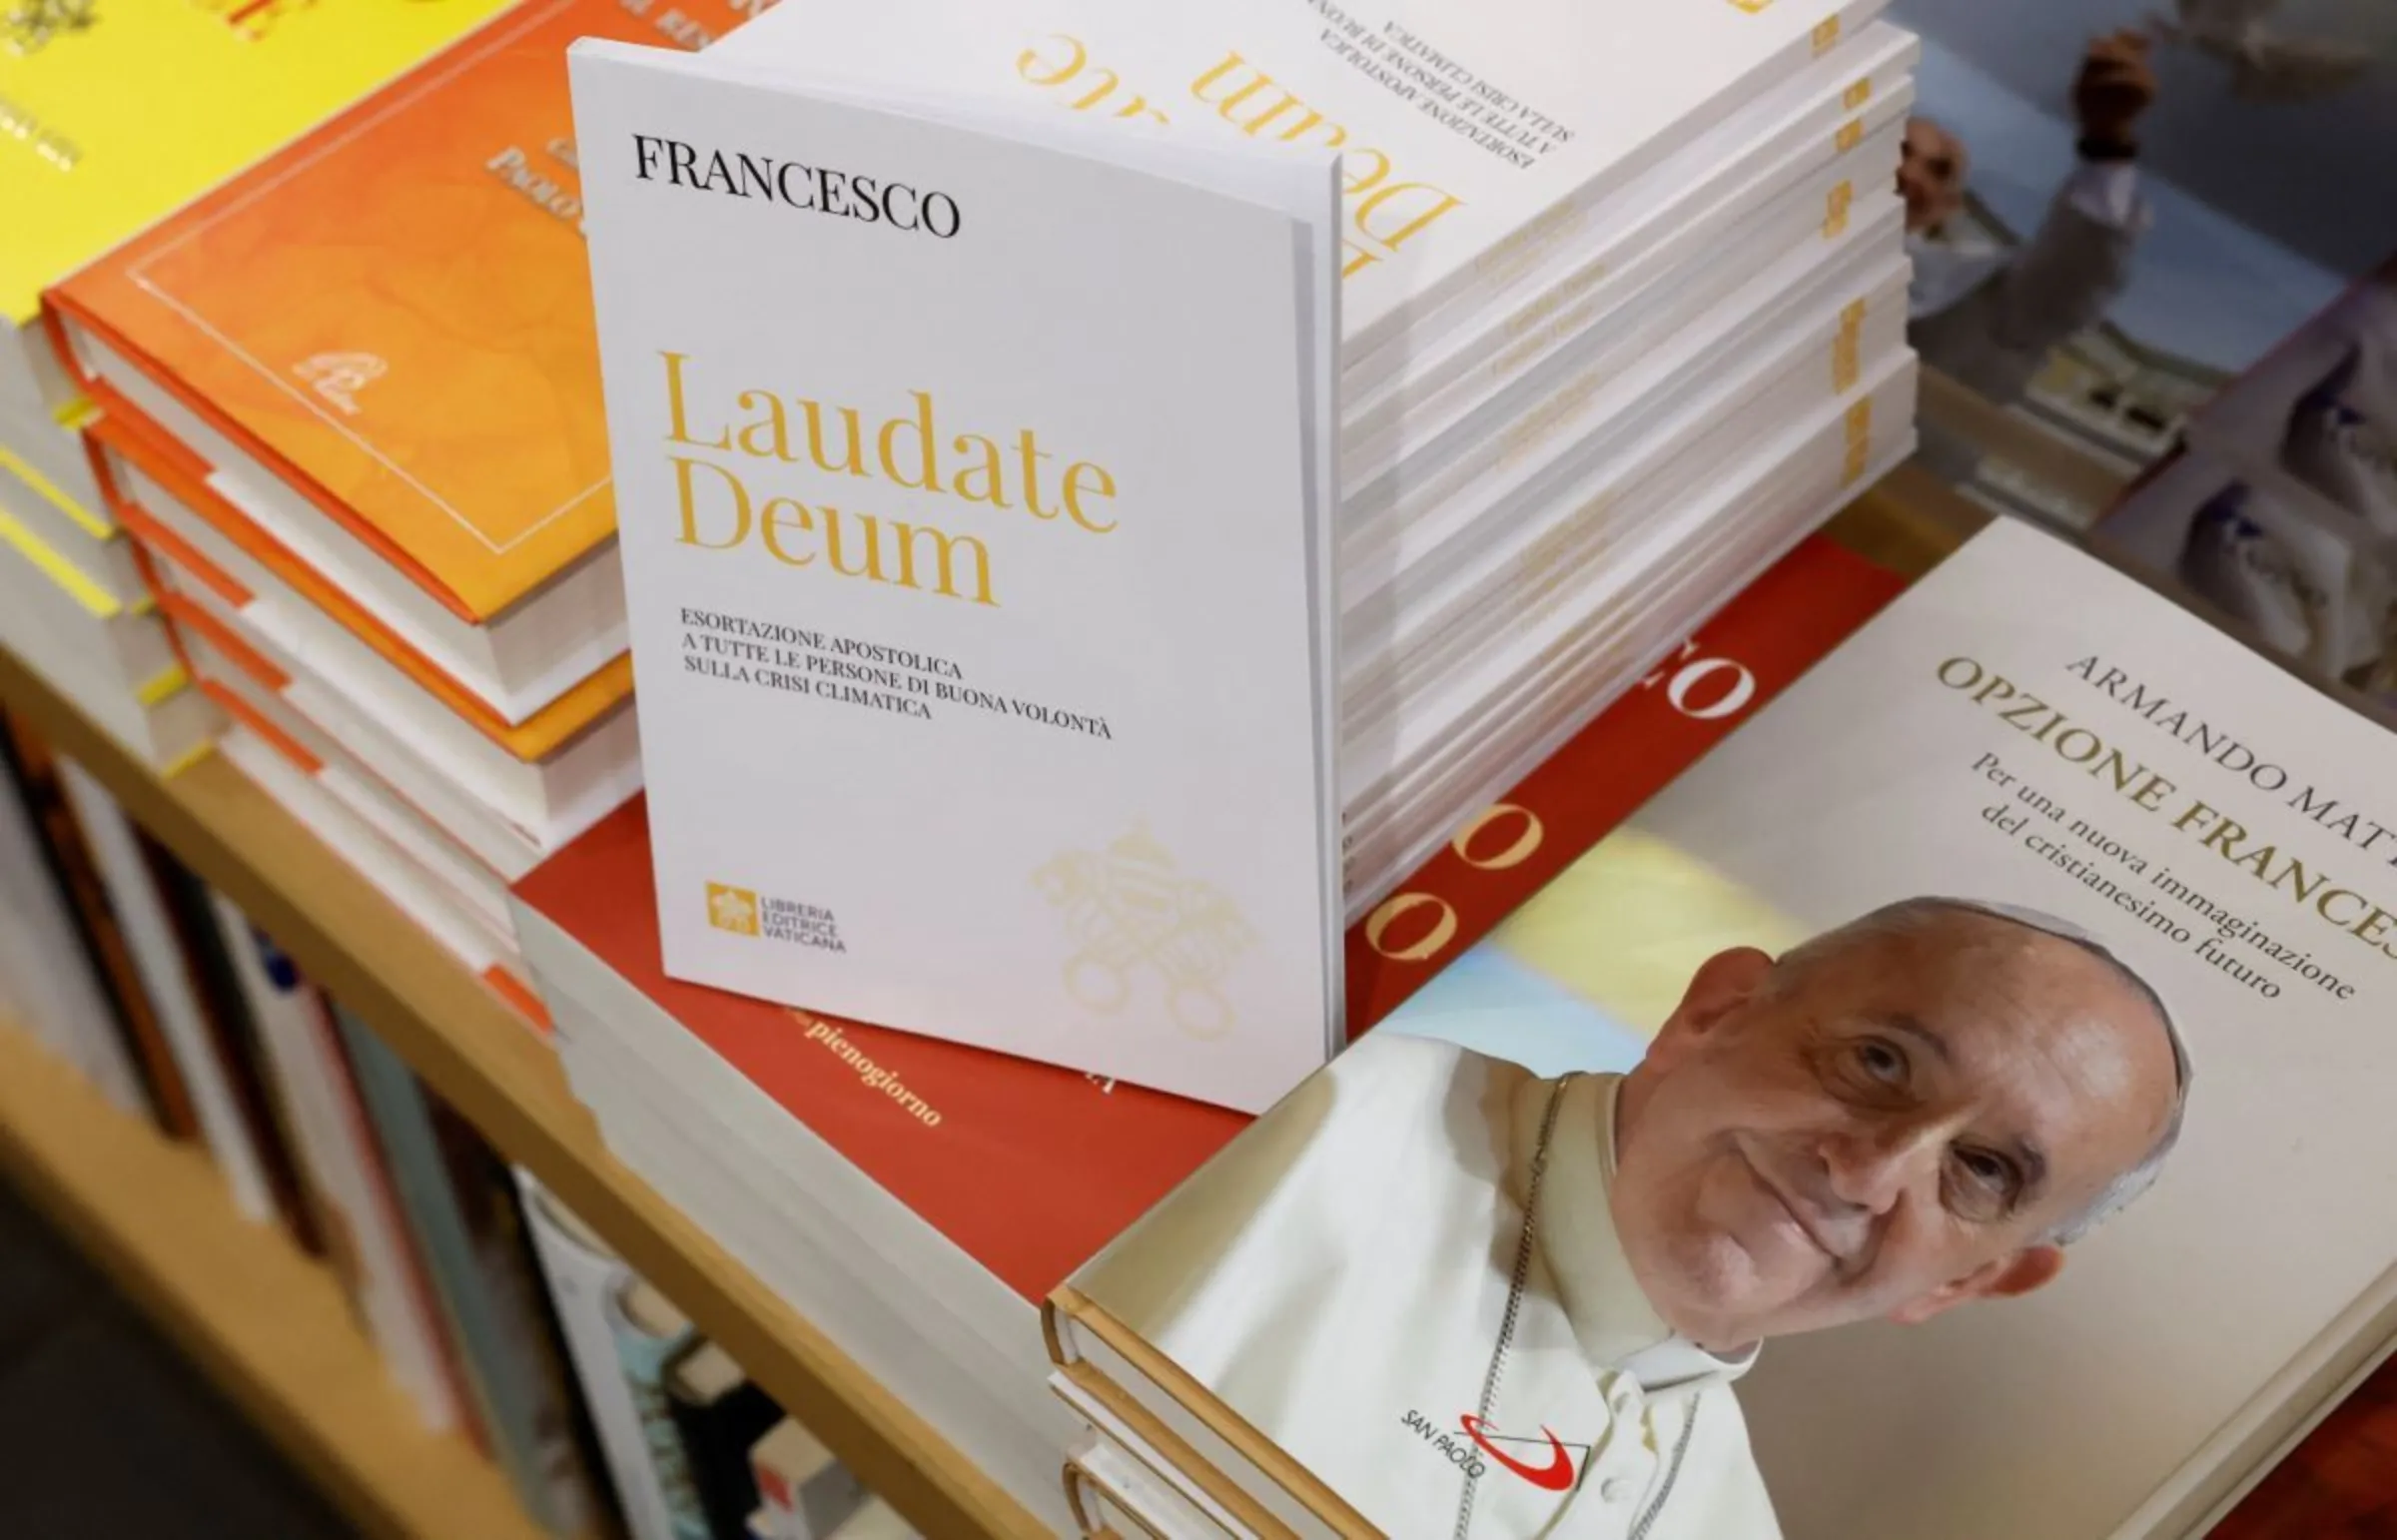 The document, known as an Apostolic Exhortation, titled 'Laudate Deum', written by Pope Francis, is displayed in a bookshop near the Vatican in Rome, Italy, October 4, 2023. REUTERS/Remo Casilli